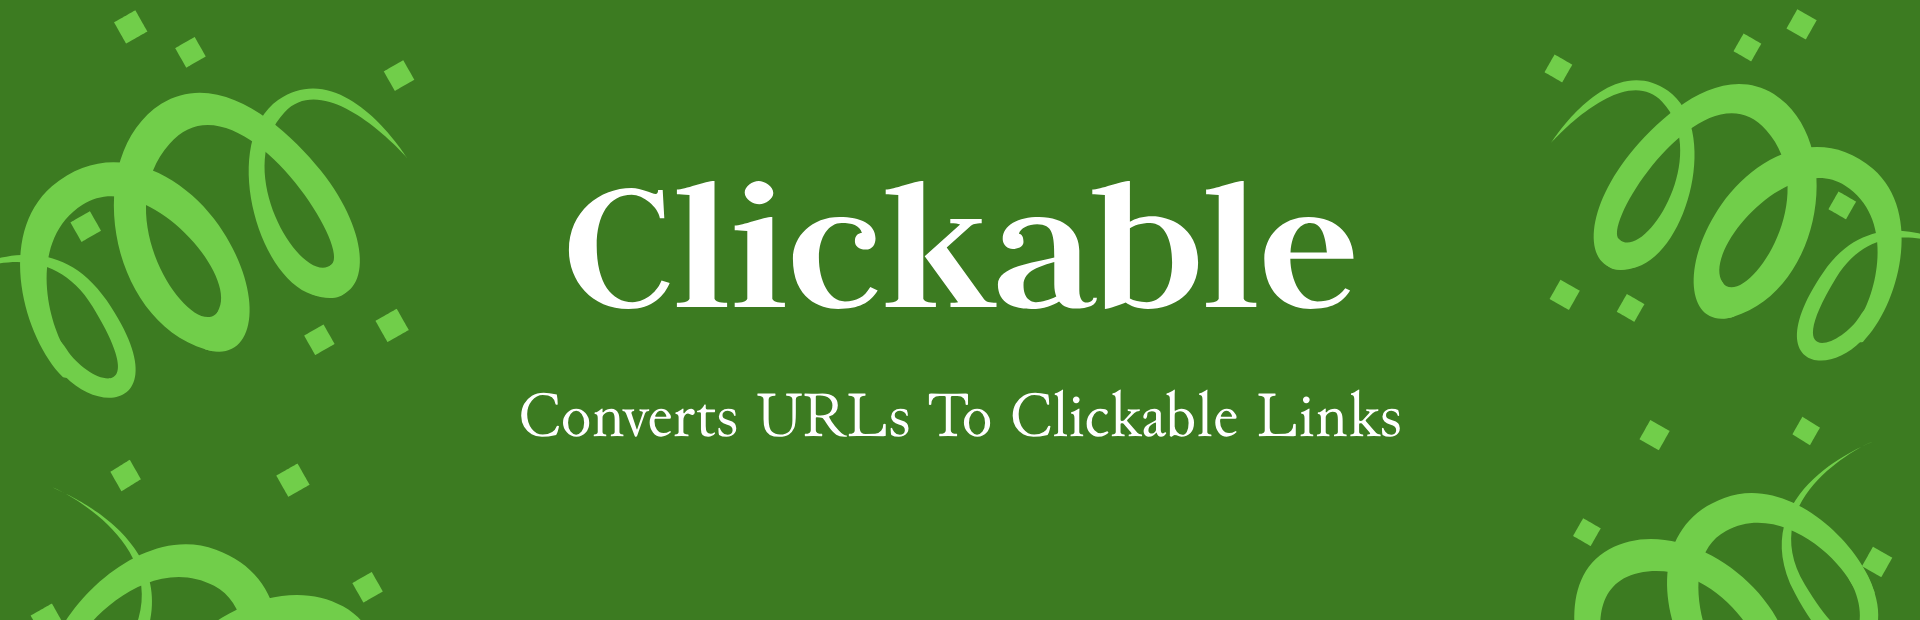 Clickable – Converts URLs To Clickable Links Preview Wordpress Plugin - Rating, Reviews, Demo & Download